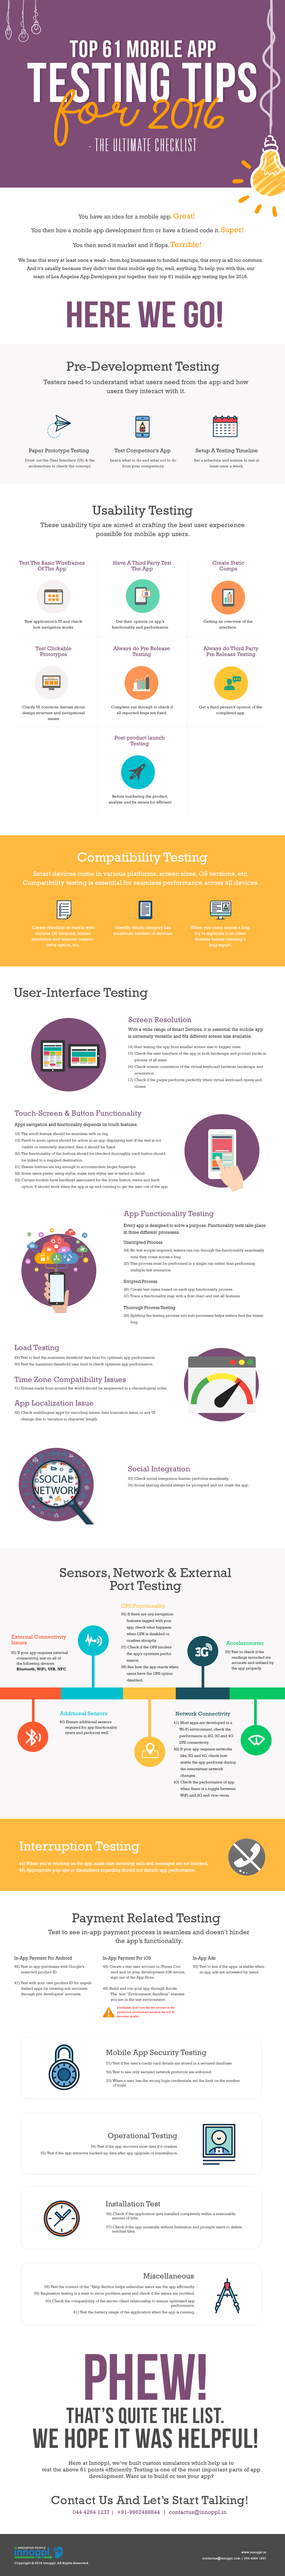 Top 61 Mobile App Testing Tips For 2016 - The Ultimate Checklist